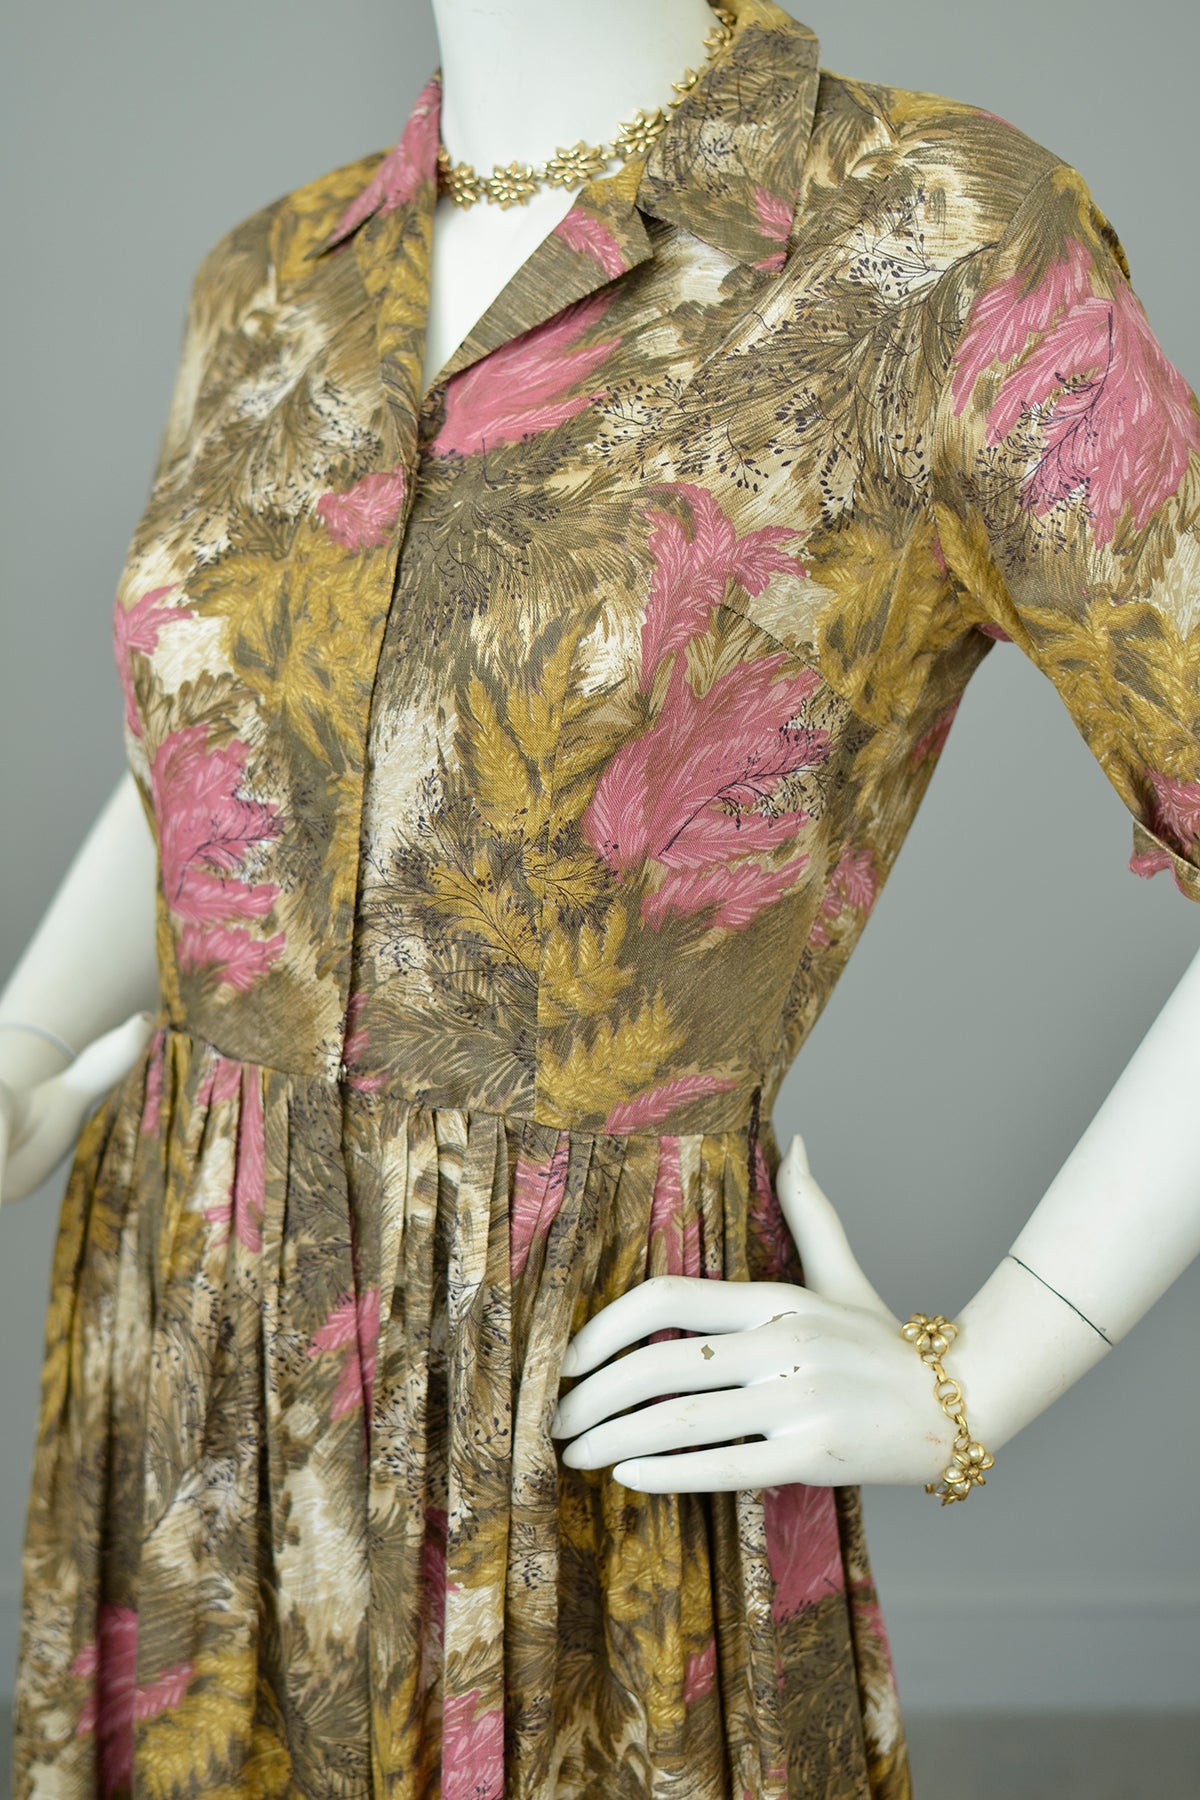 1950s Taupe Gold Pink Feathery Leaf Novelty Print Shirtwaist Dress